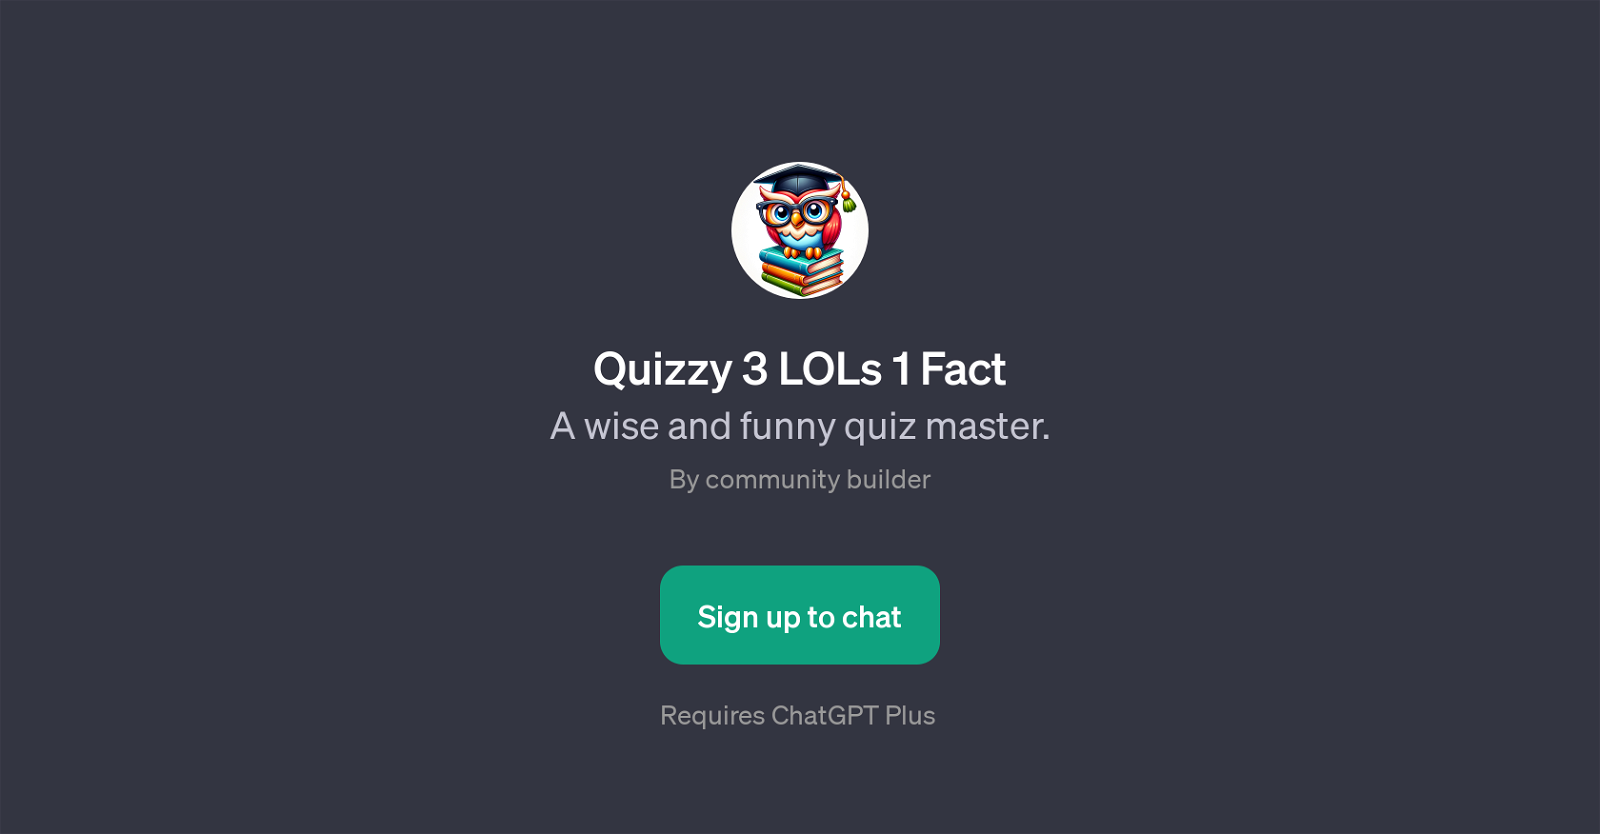 Quizzy 3 LOLs 1 Fact website